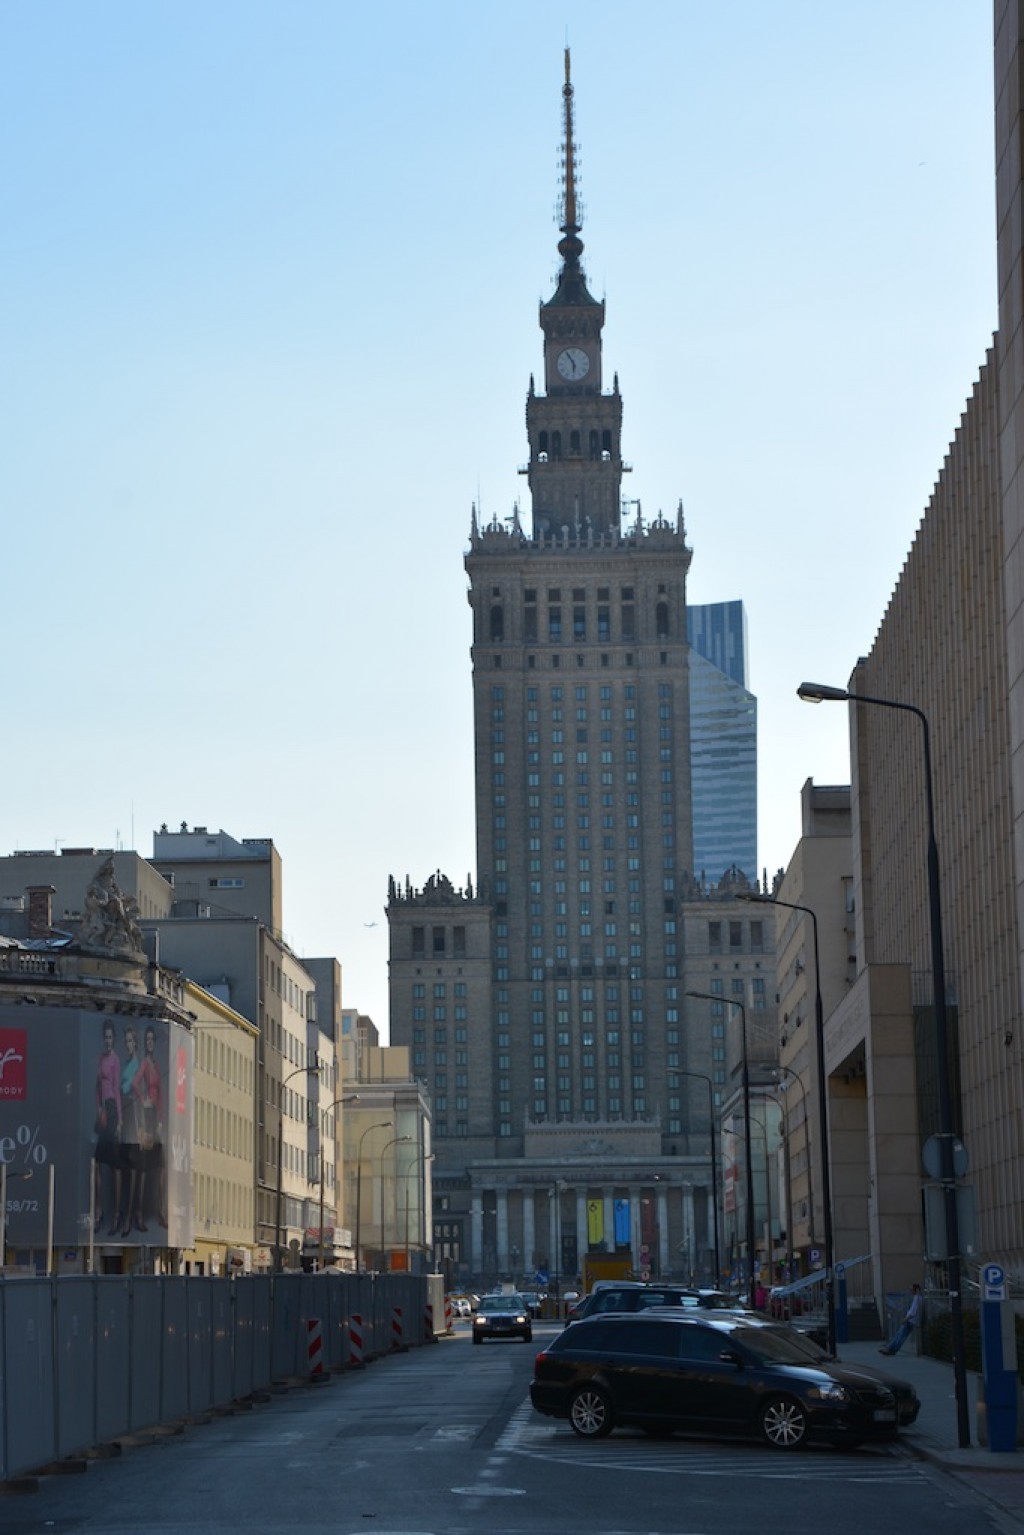 View of the Palace of Culture and Science